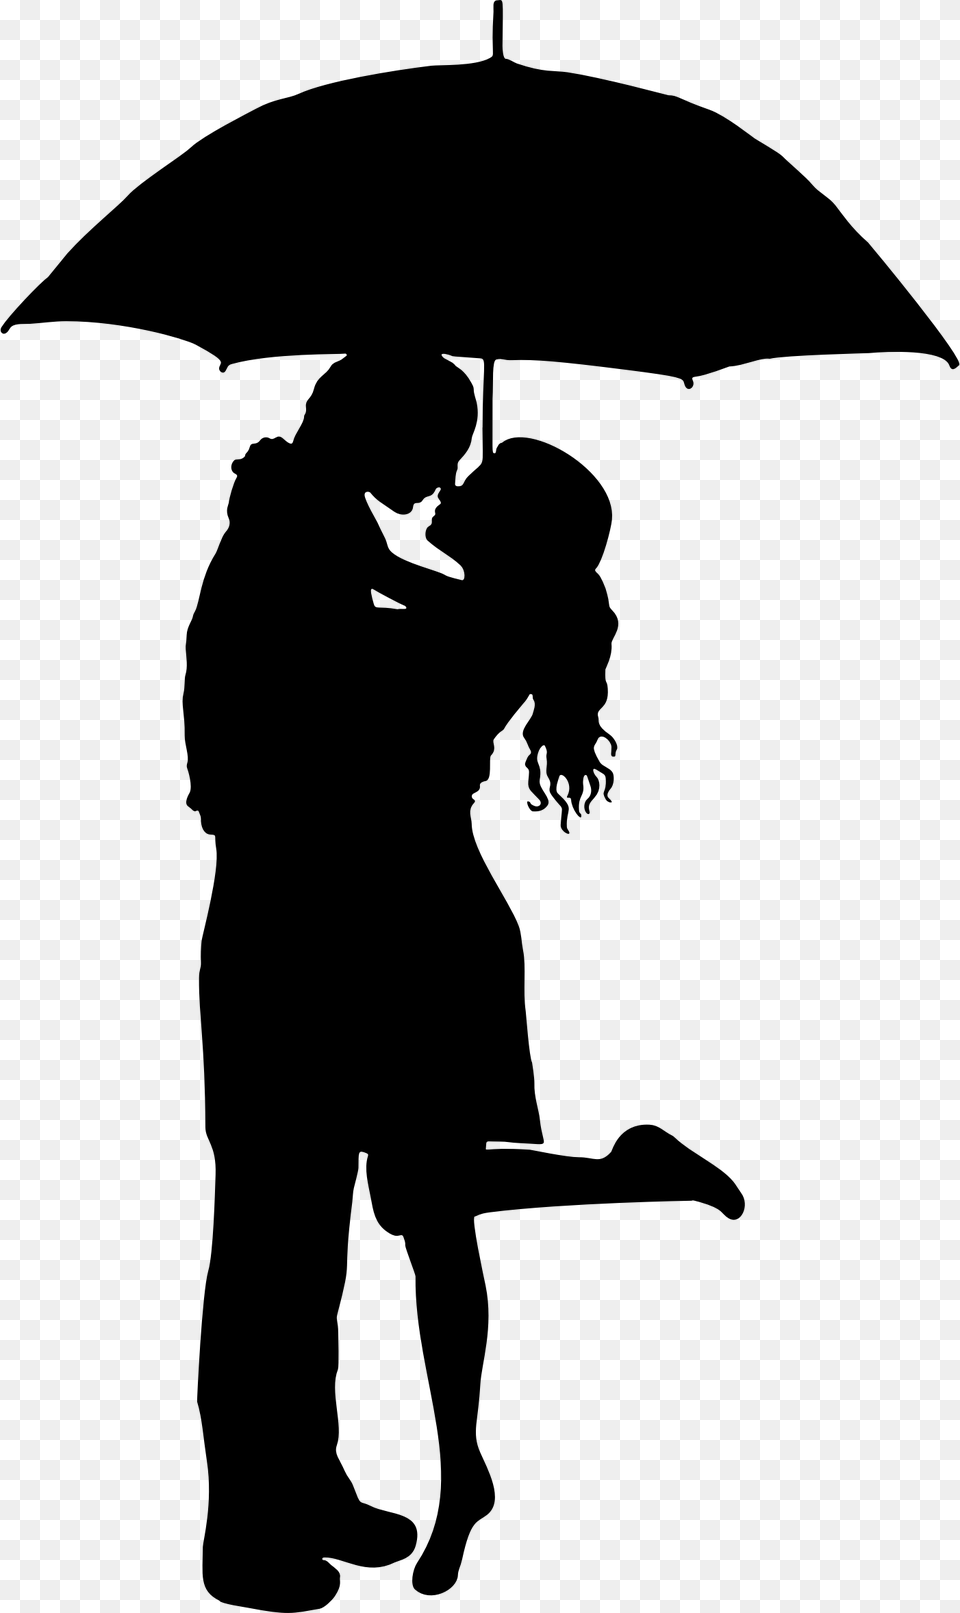 Big Image Umbrella Silhouette Couple Kiss, Gray Free Png Download